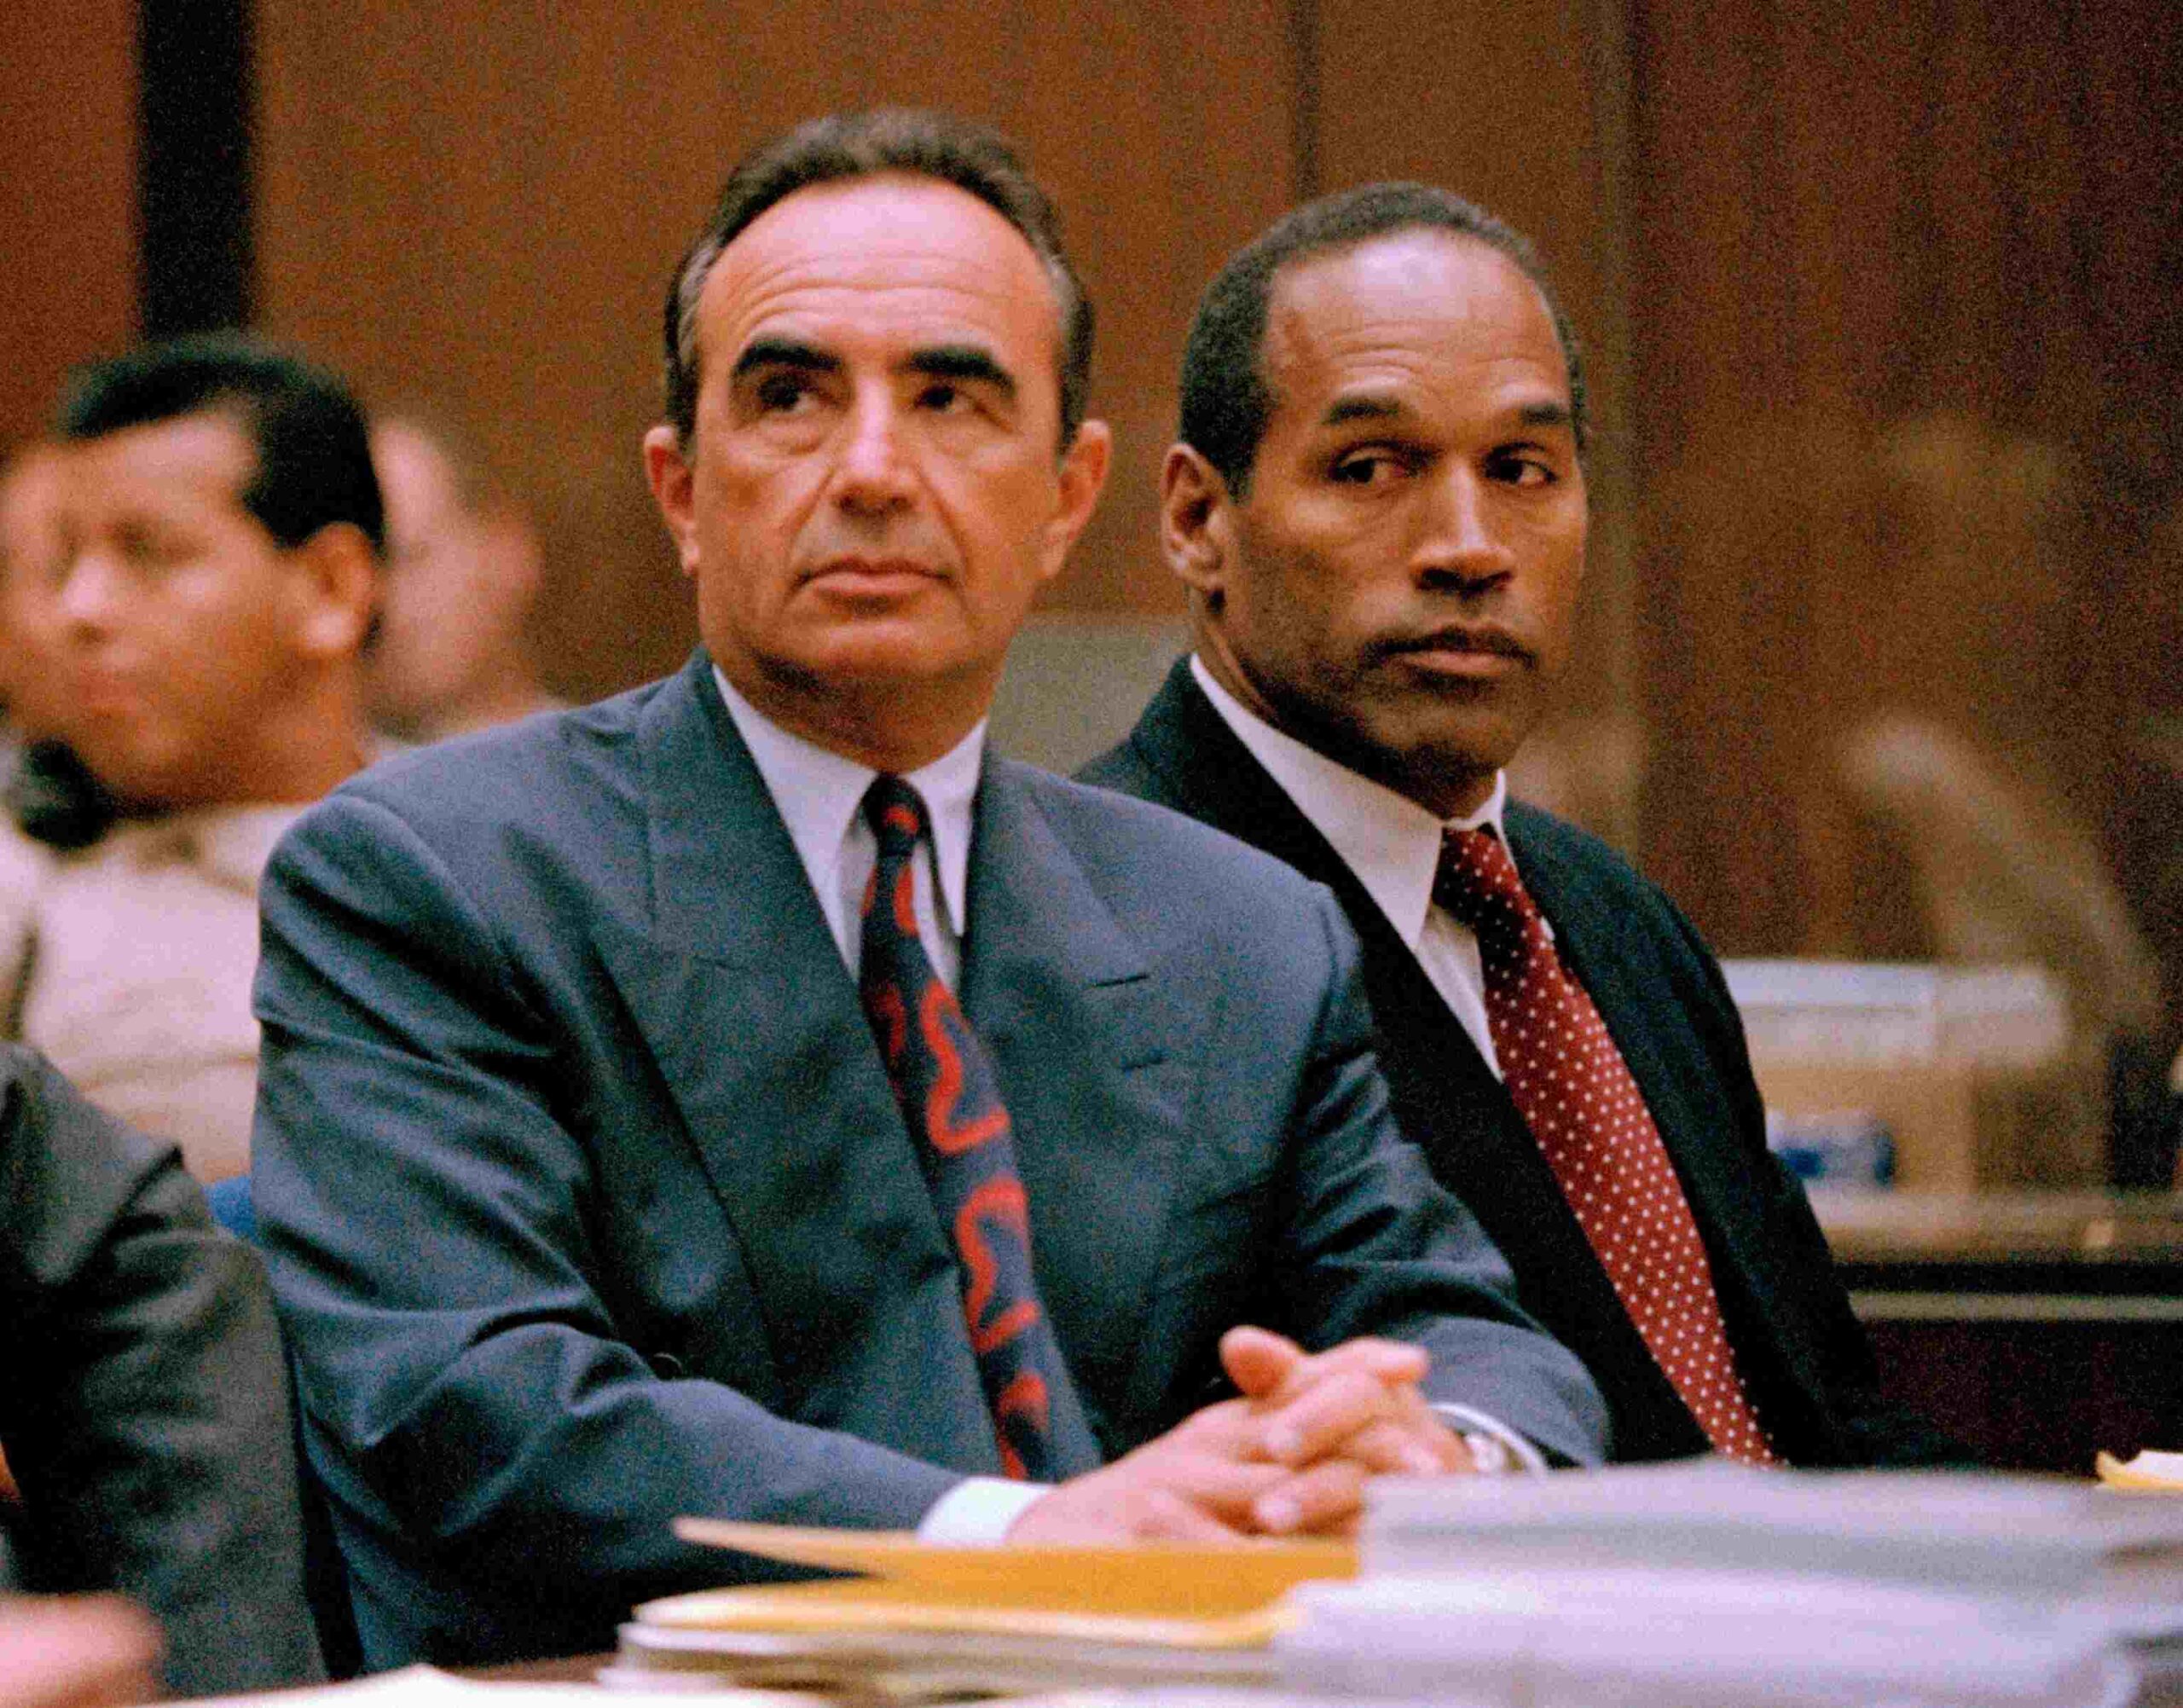 O. J. Simpson (R) appears with his attorney Robert Shapiro in Los Angeles County Superior Court for his preliminary hearing in Los Angeles, June 30, 1994.(Photo: Newsbase/AP, FILE)